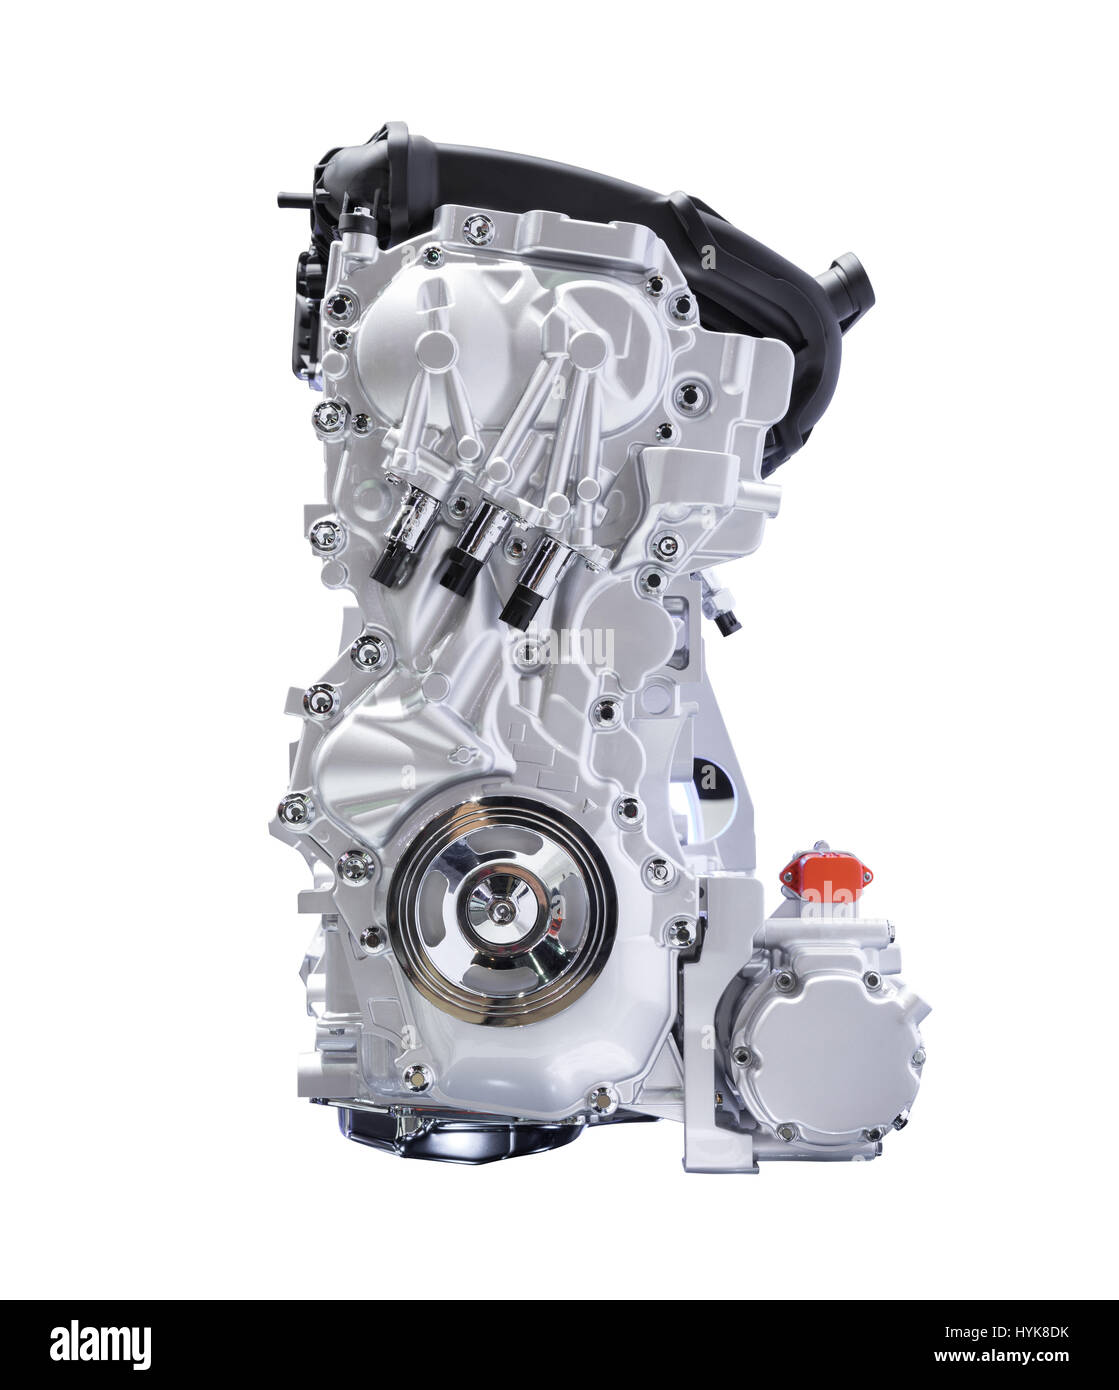 Hybrid car engine isolated on white background with clipping path Stock Photo